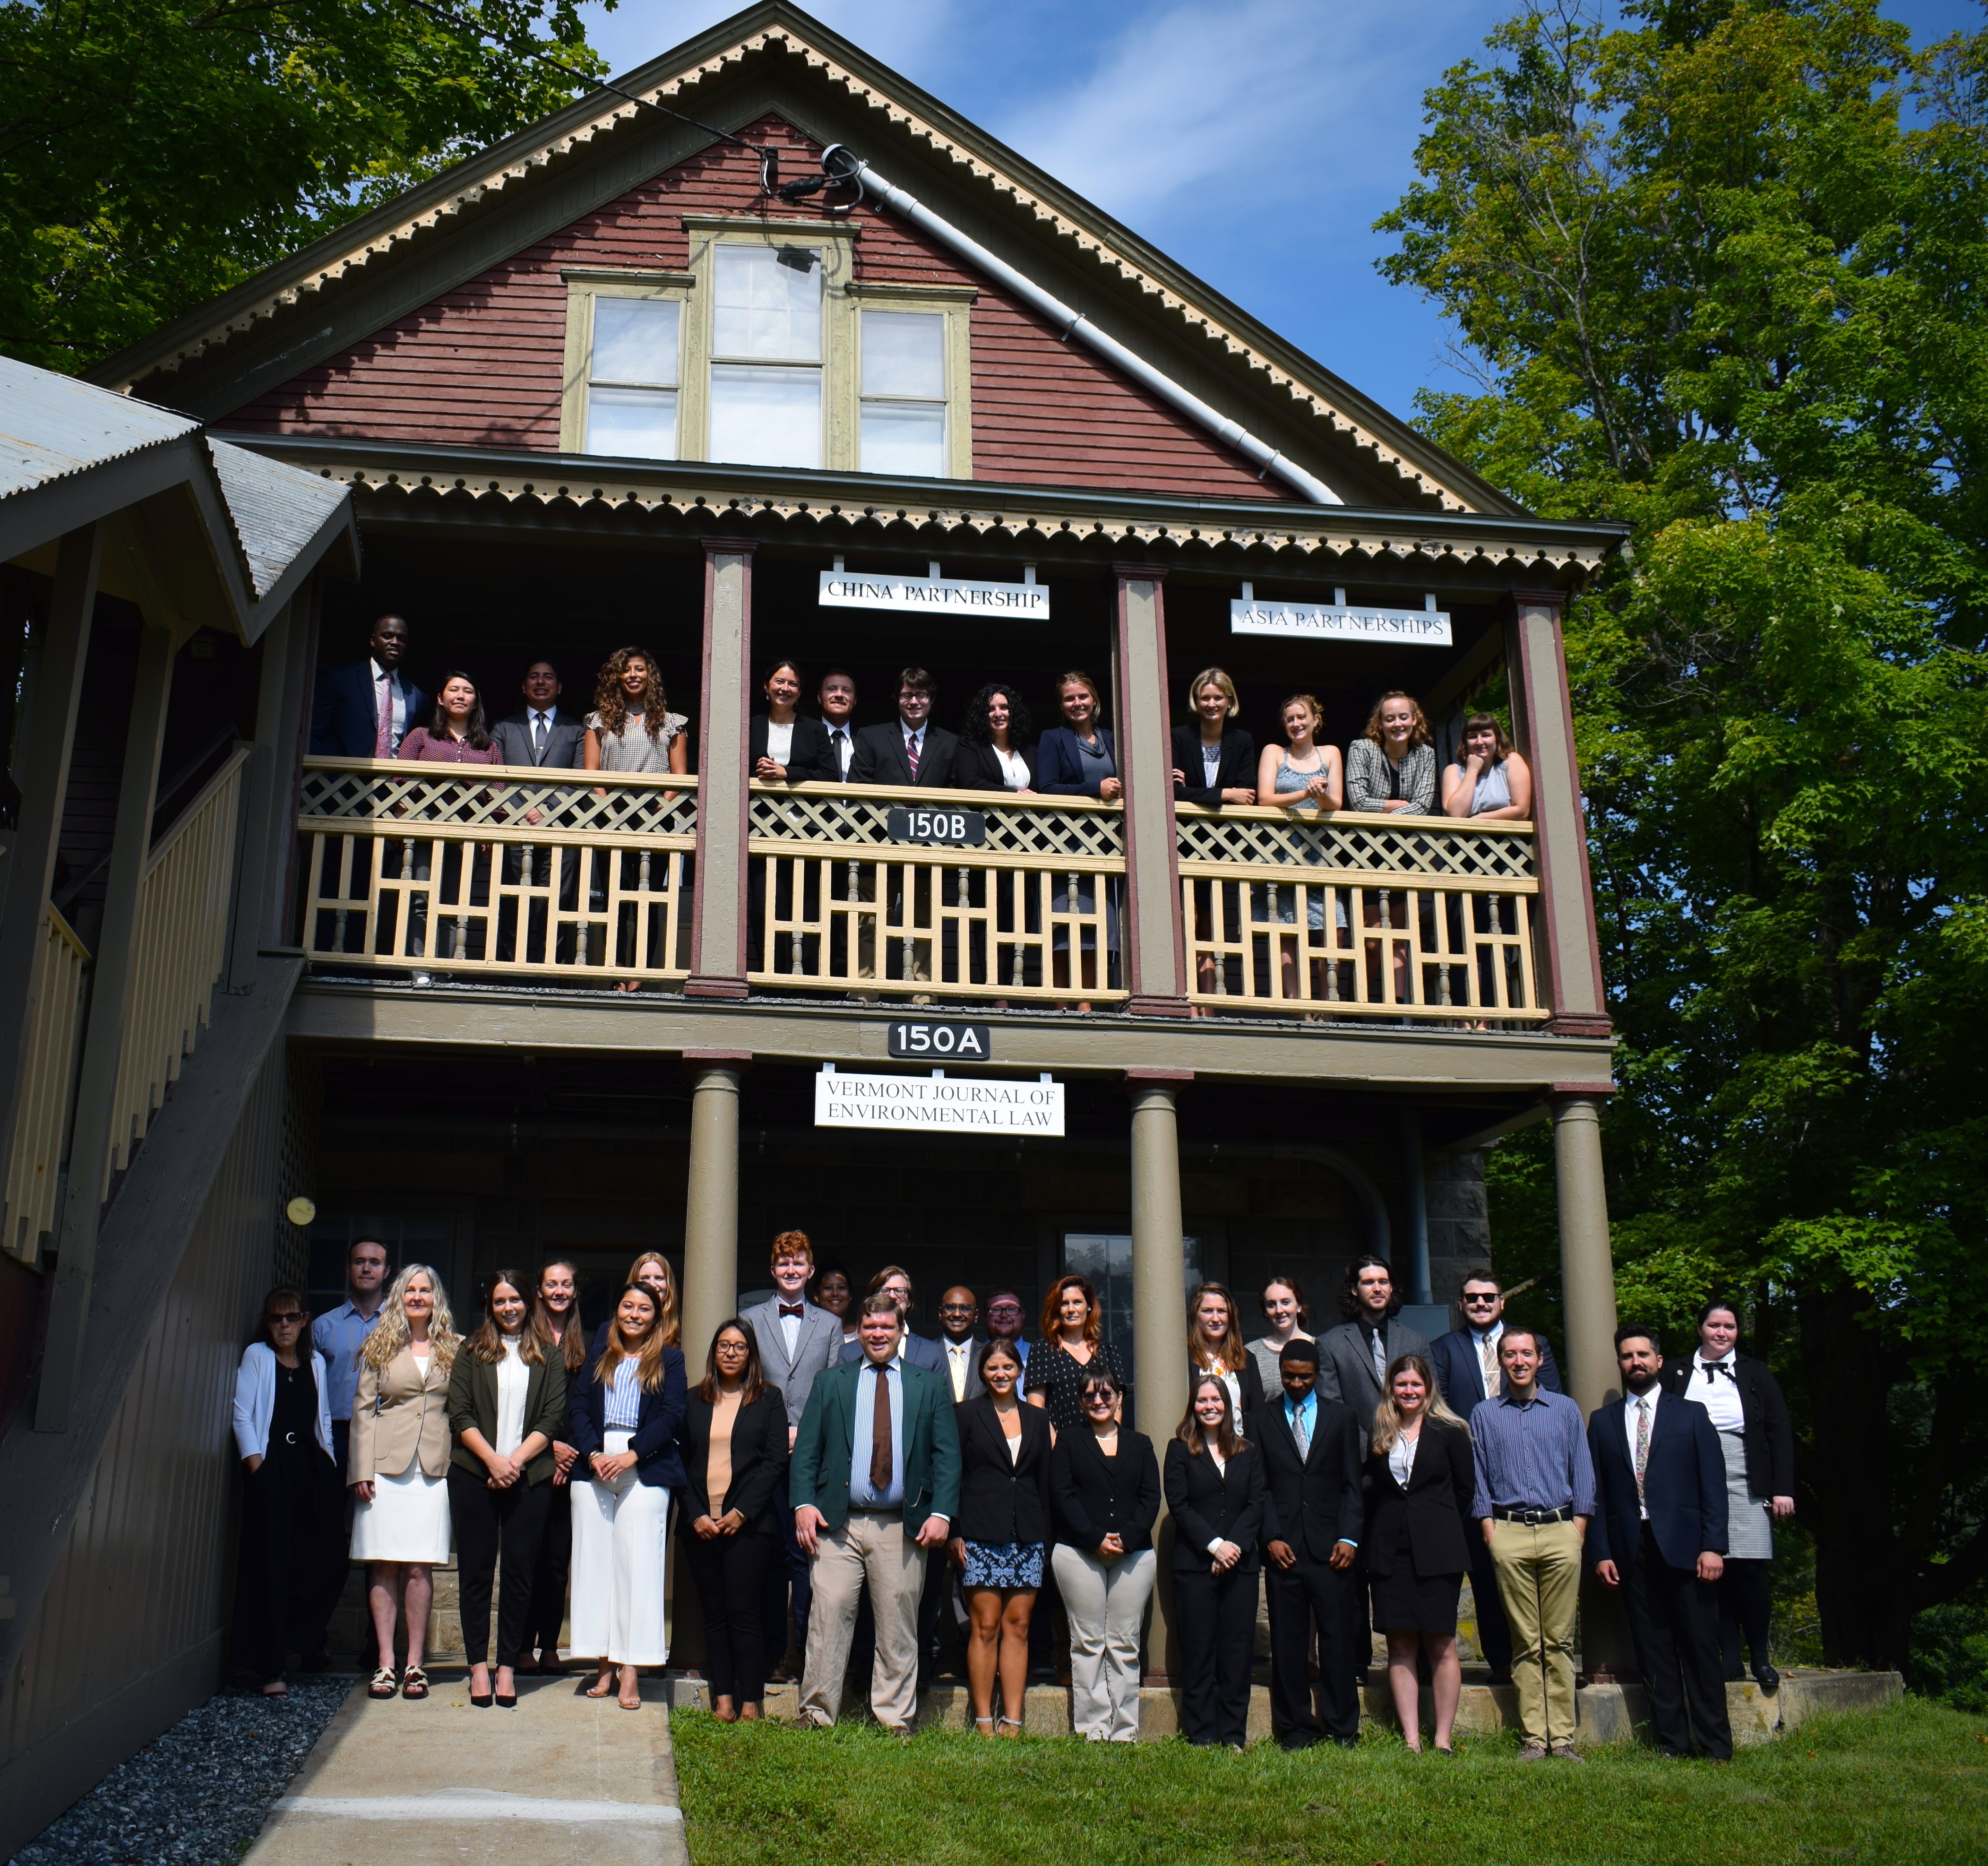 Group photo of the Vermont Journal of Environmental Law team